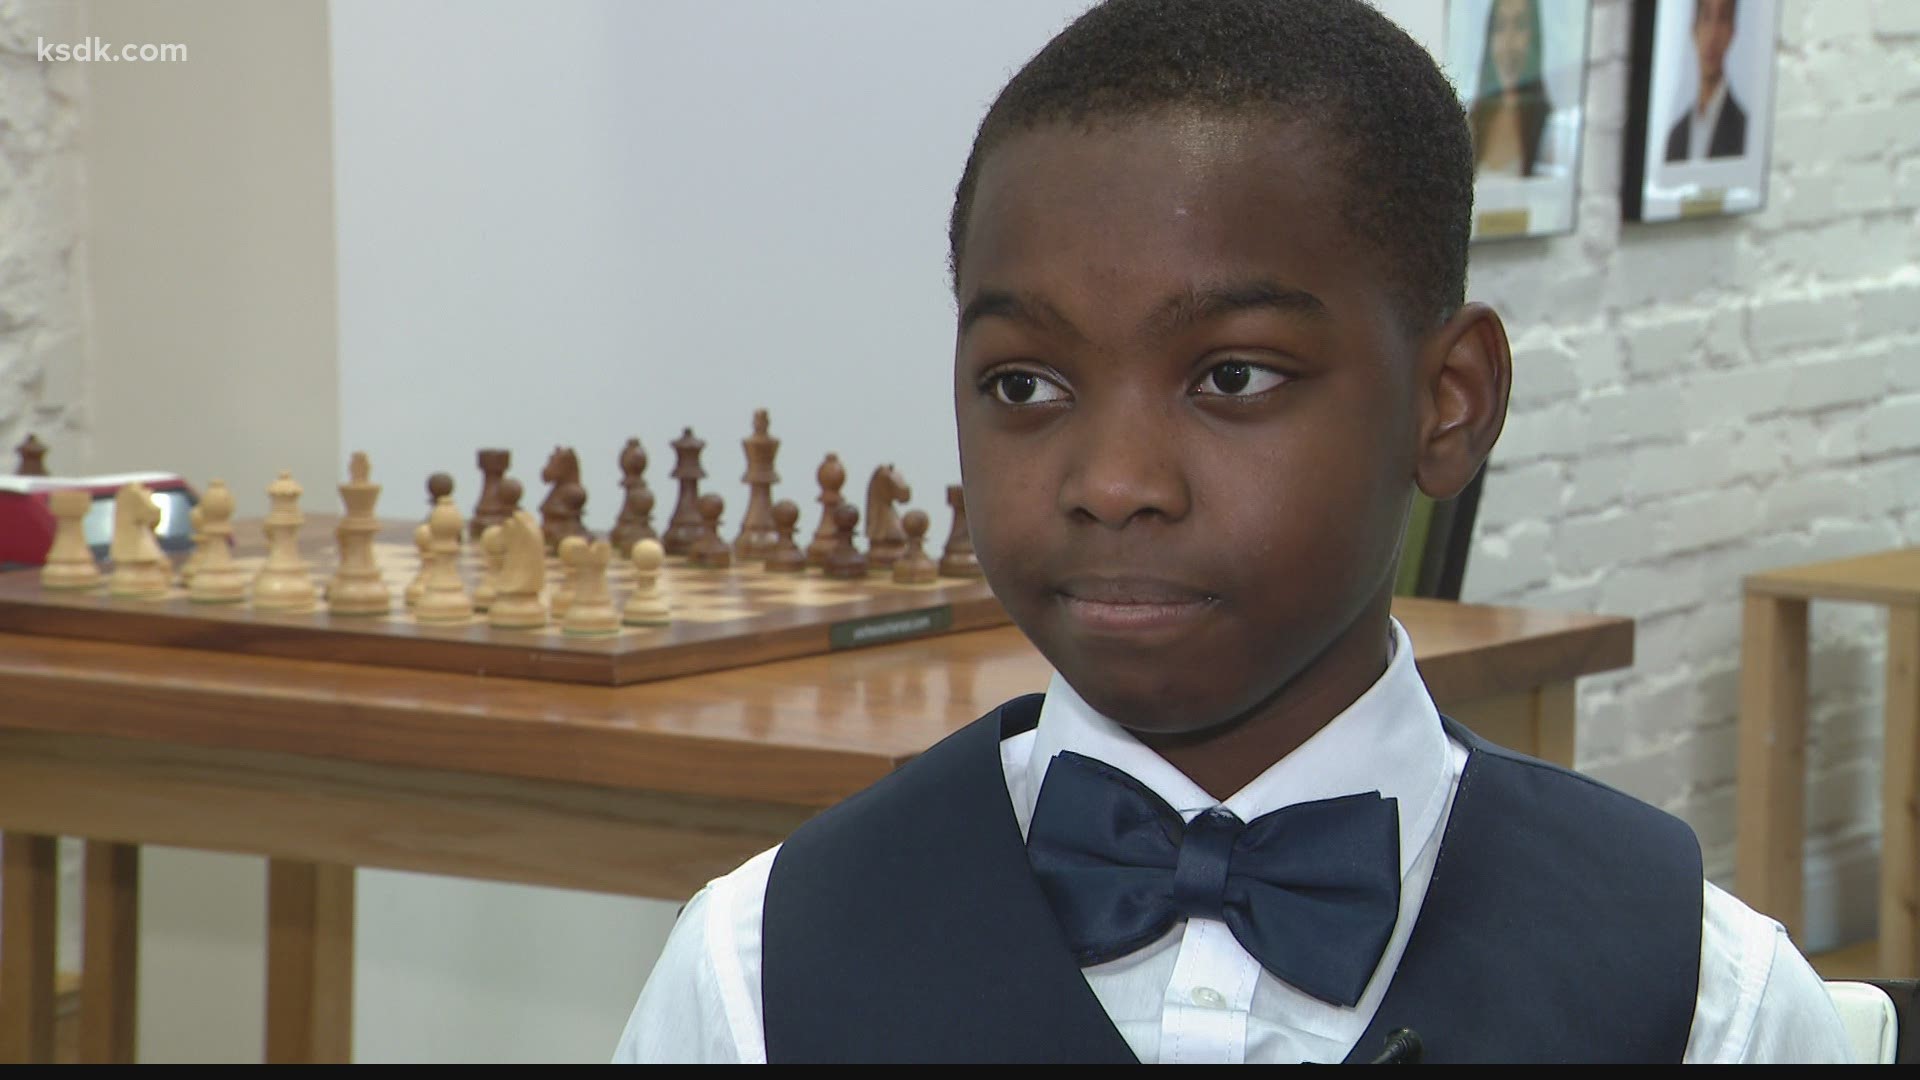 This 10 year old is on his way to becoming one of the greatest chess players in the world.